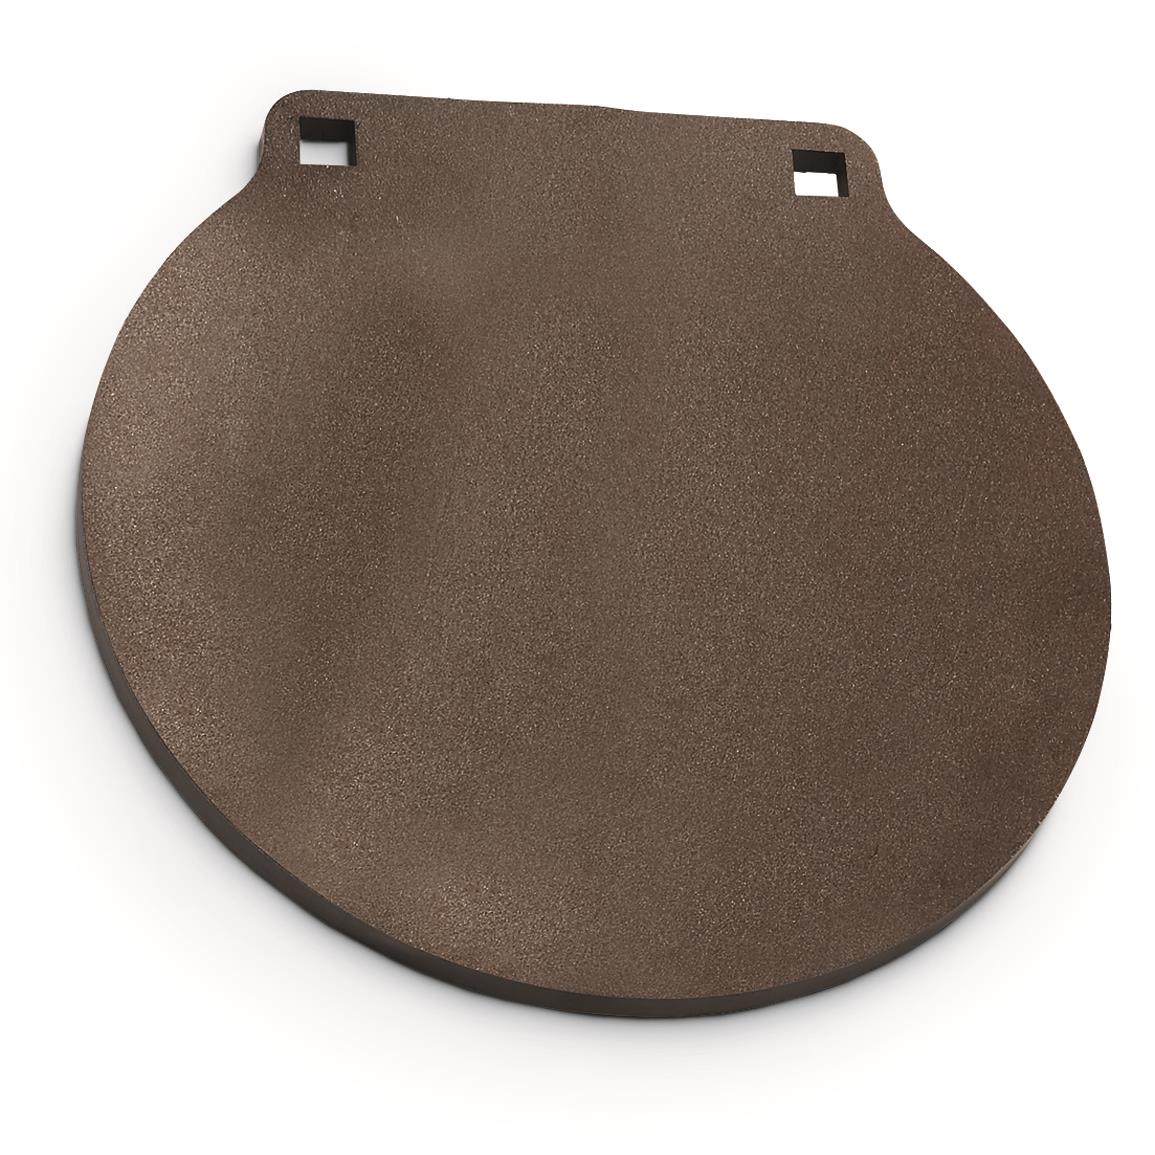 CTS AR500 Hardened Steel Gong Shooting Target, 3/8" Thick